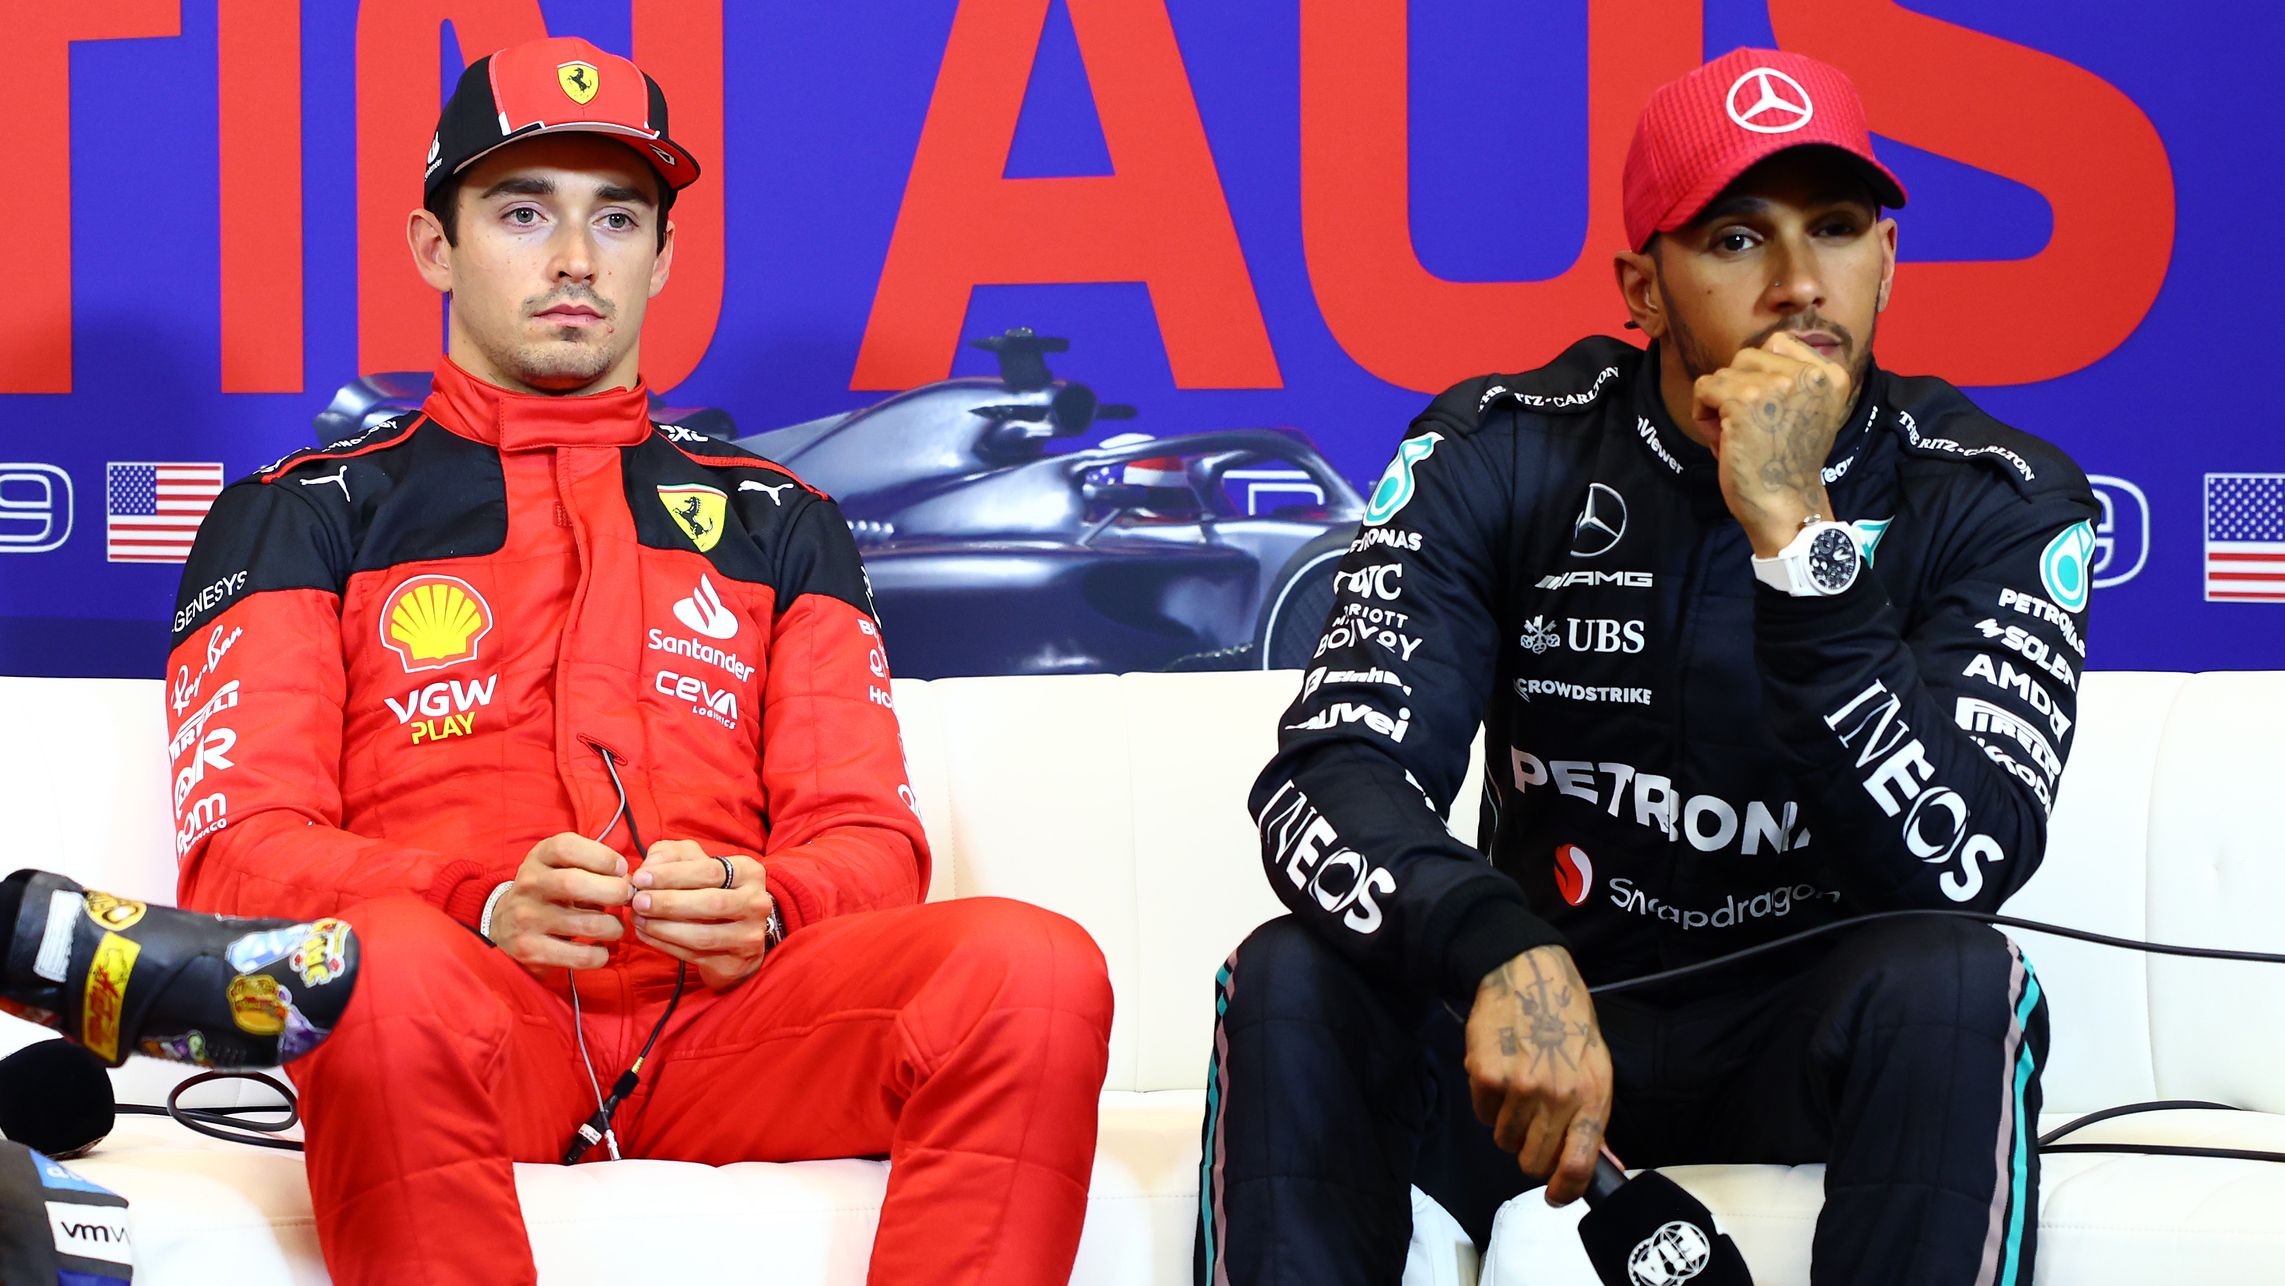 Pole position qualifier Charles Leclerc of Monaco and Ferrari, Second placed qualifier Lando Norris of Great Britain and McLaren and third placed qualifier Lewis Hamilton of Great Britain and Mercedes talk in a press conference after qualifying ahead of the F1 Grand Prix of United States.